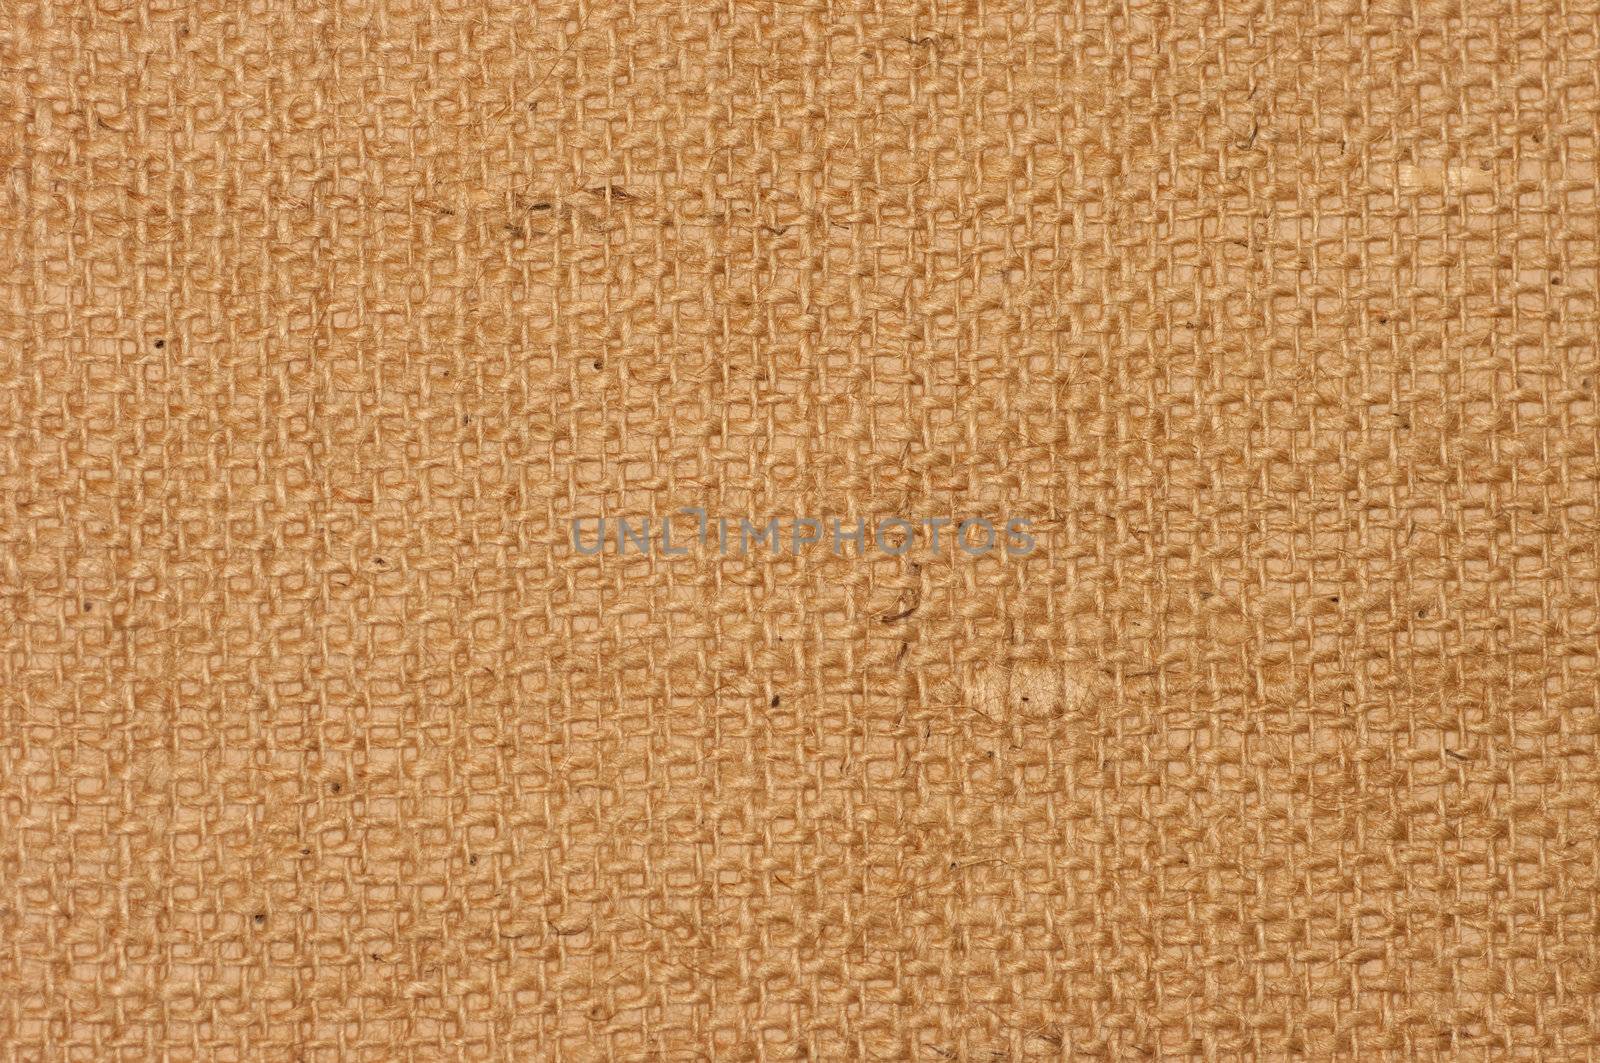 A brown sack textured . Great for backgroundtexture.